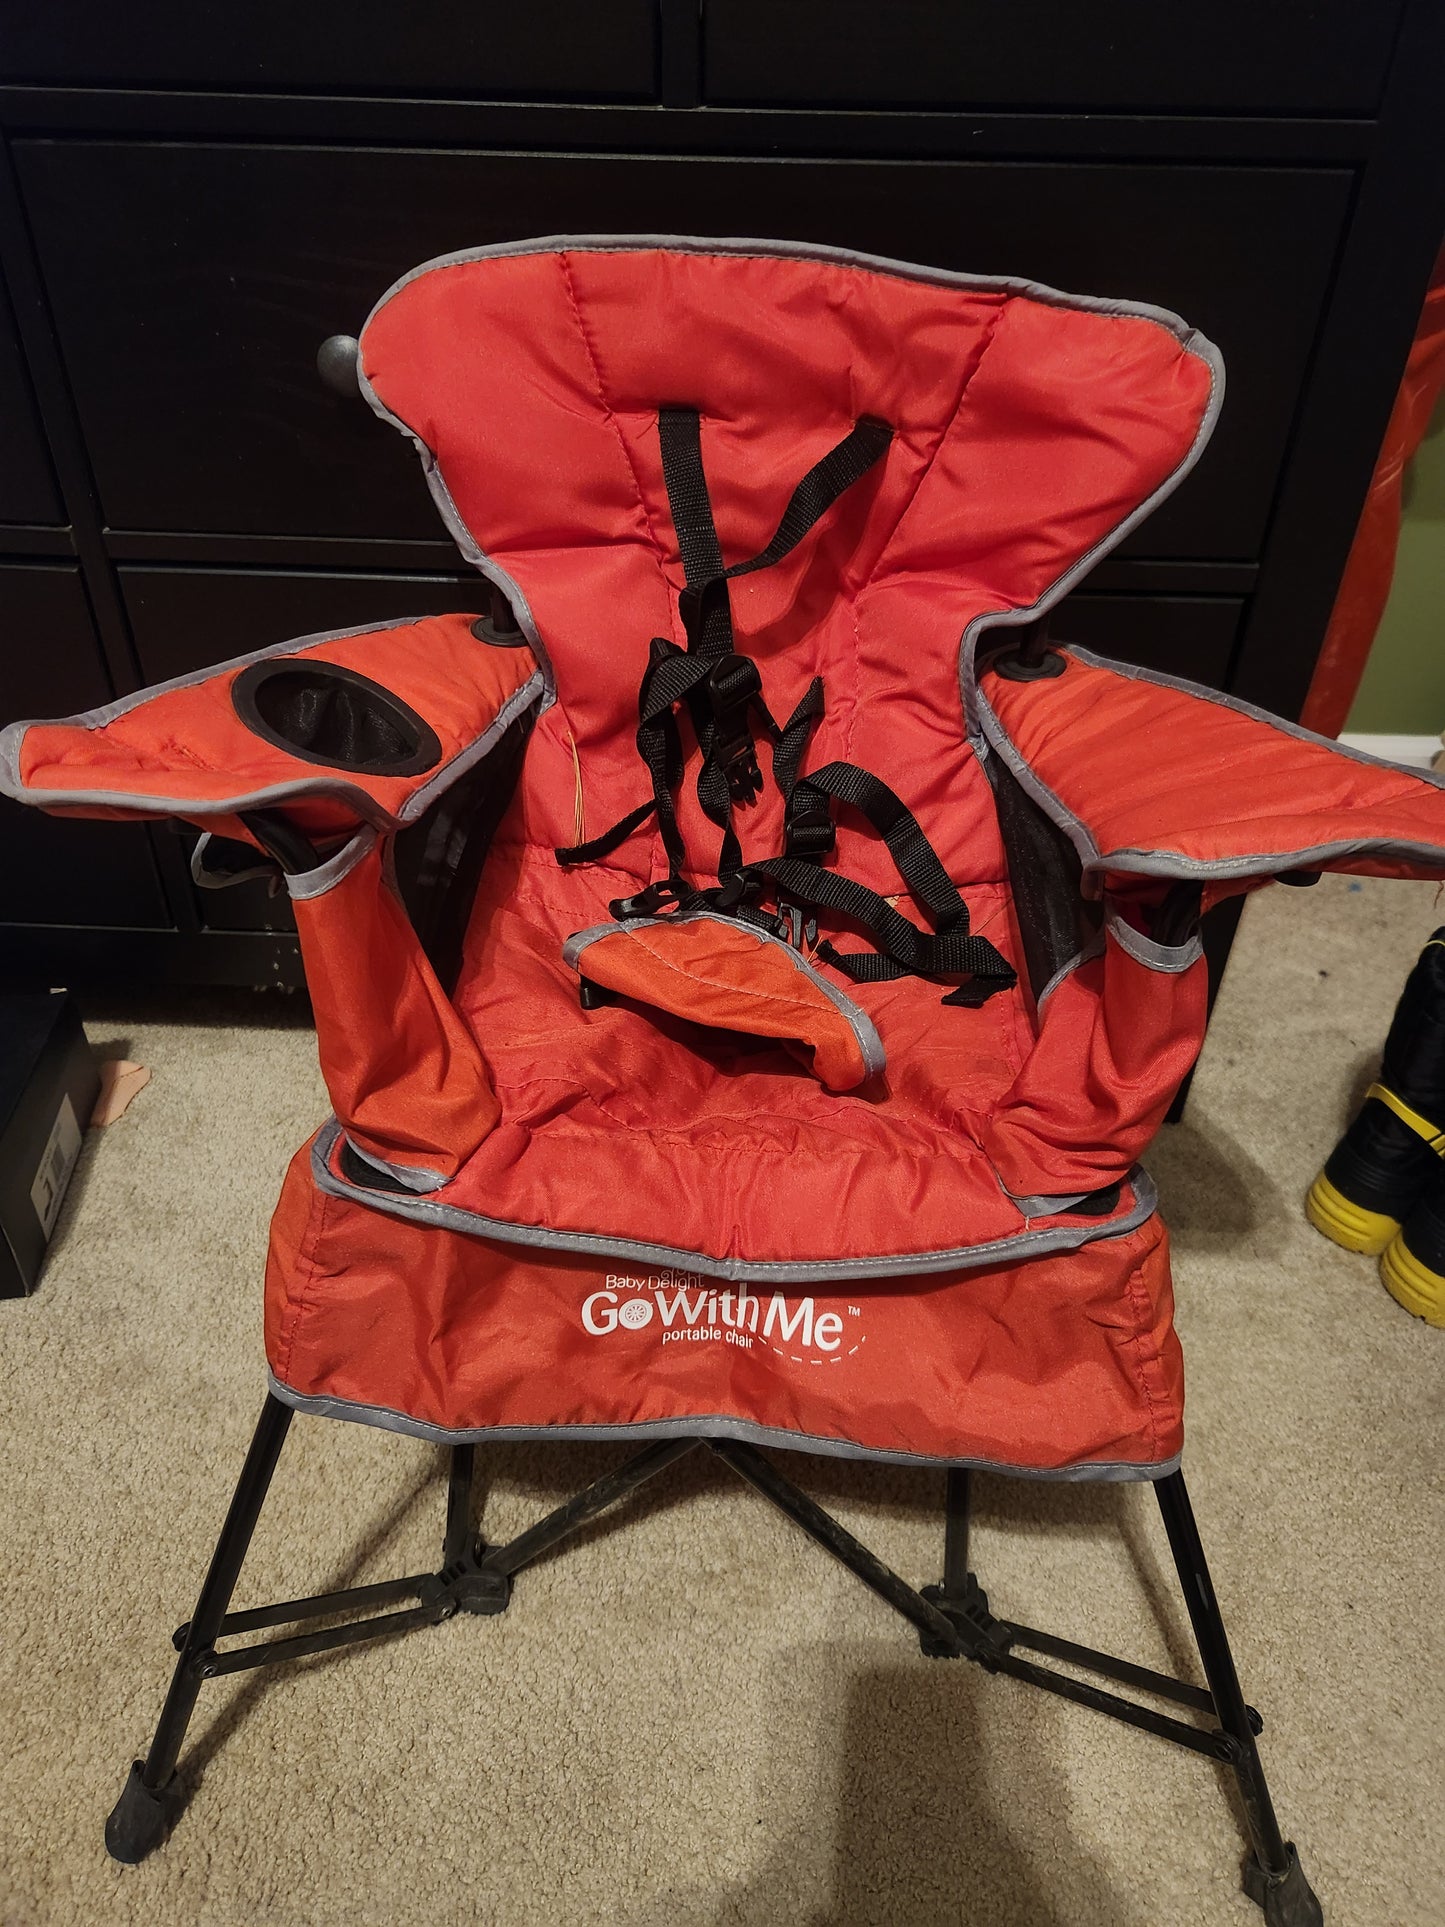 Toddler camping chair